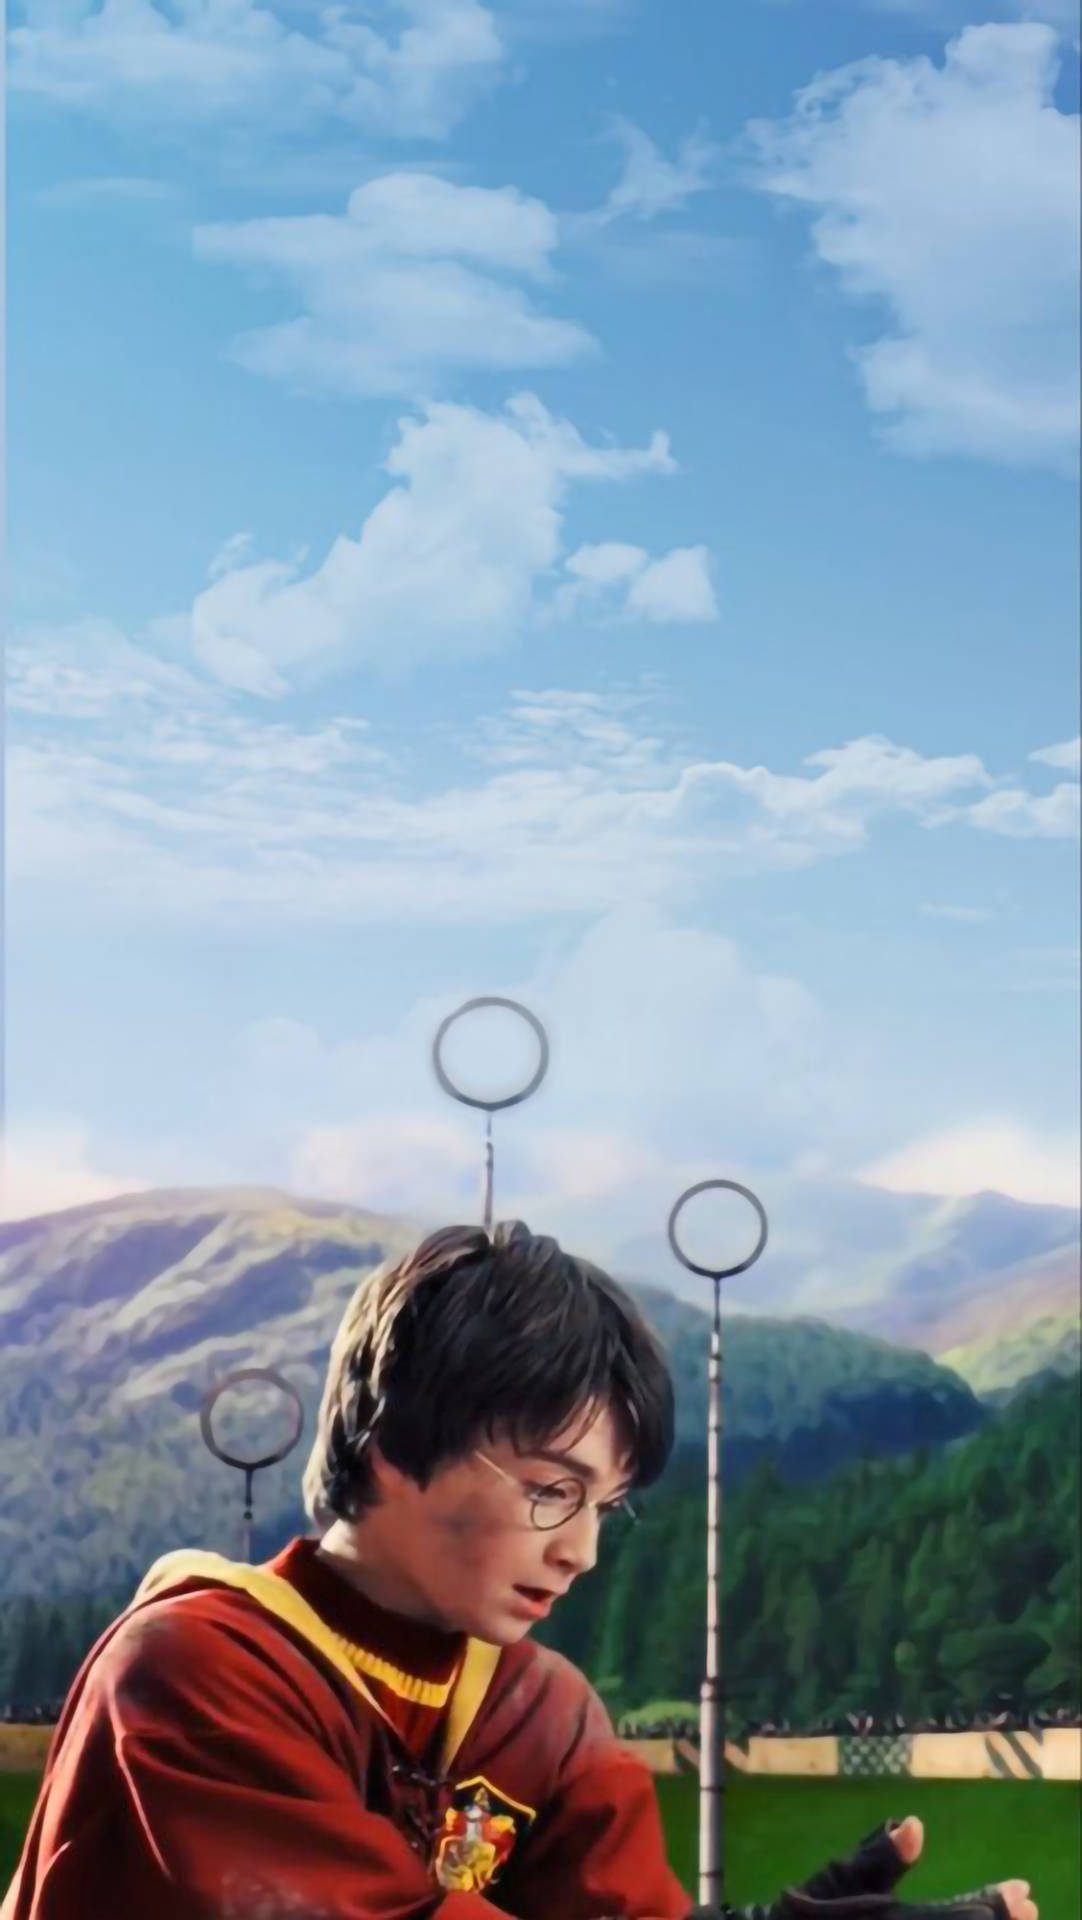 Aesthetic Harry Potter Quidditch Player Wallpaper